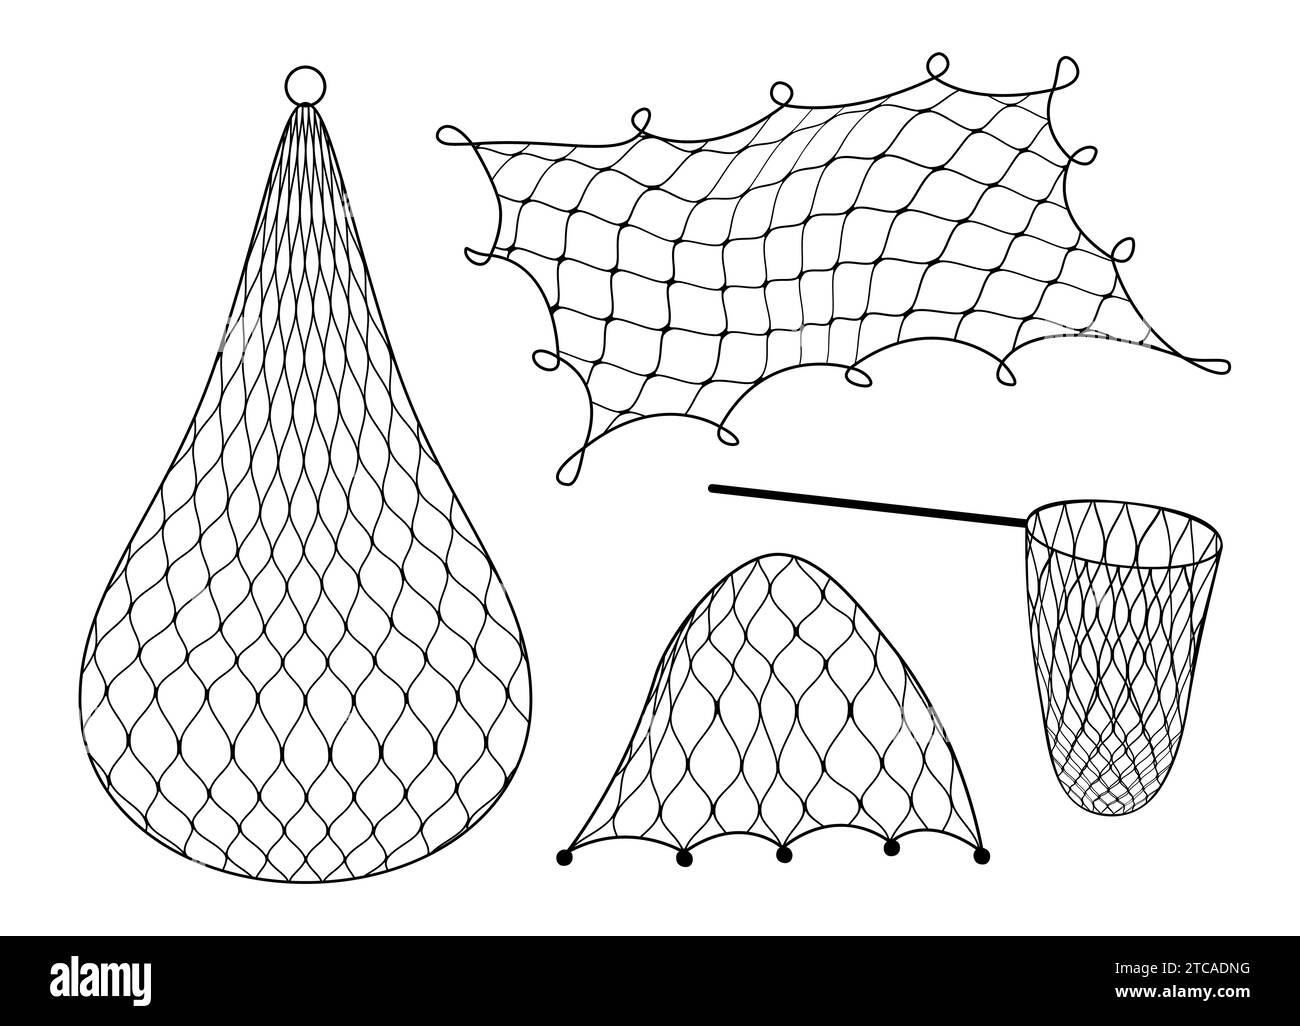 Fishnet catch fishing Stock Vector Images - Page 3 - Alamy